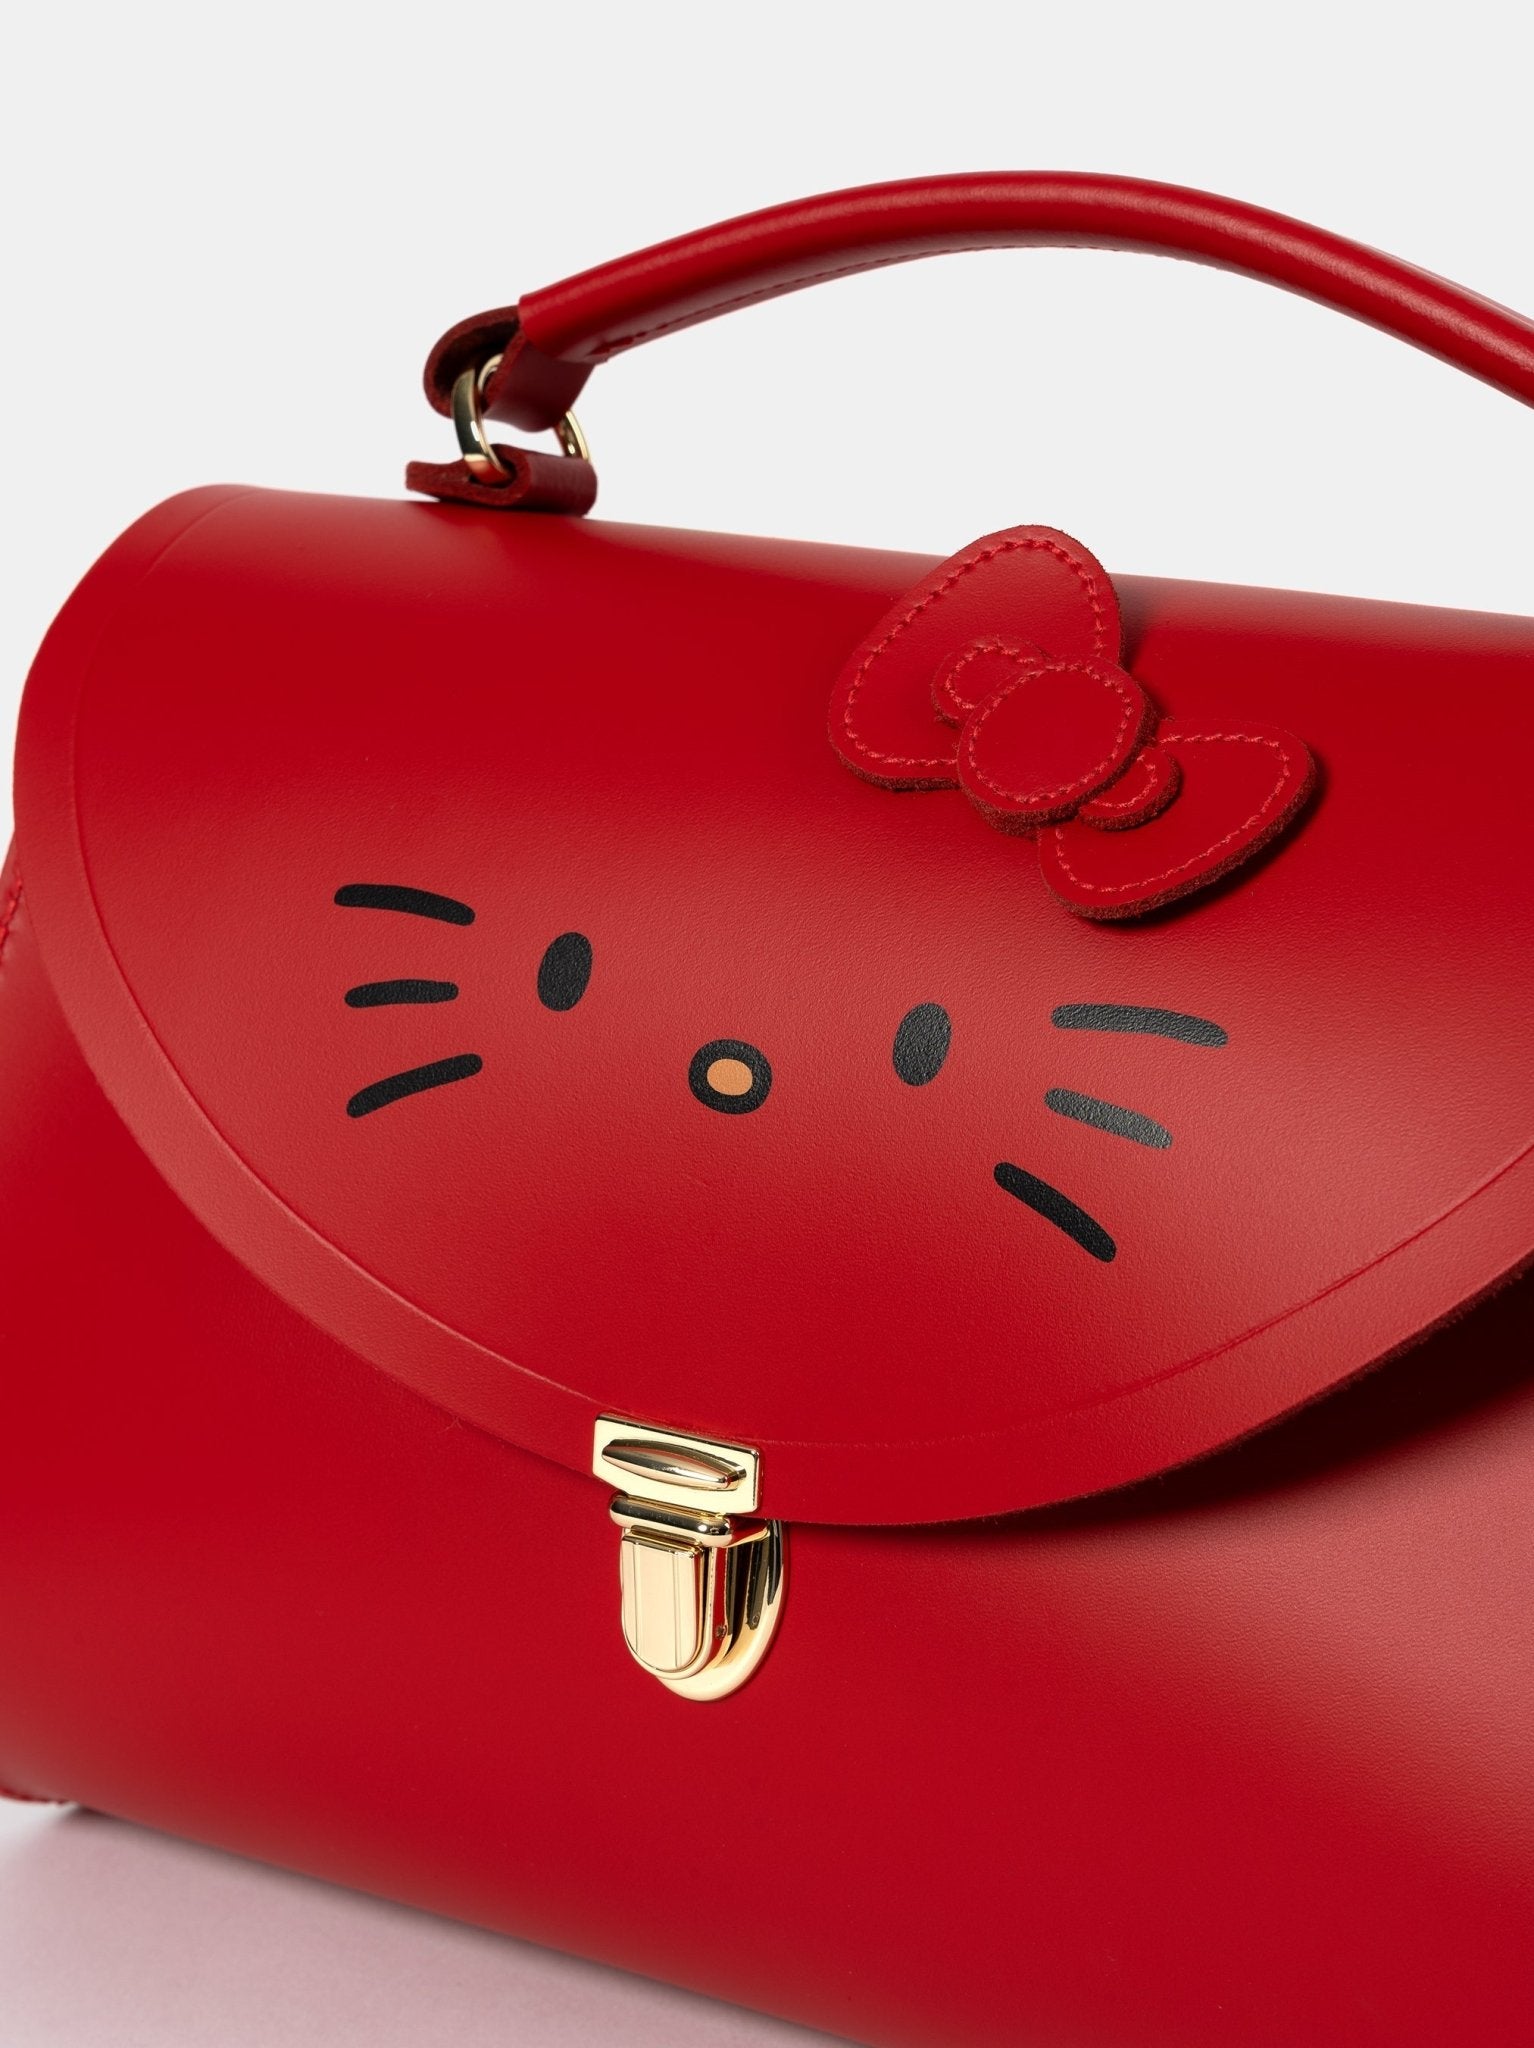 The Hello Kitty Poppy Bag - Red